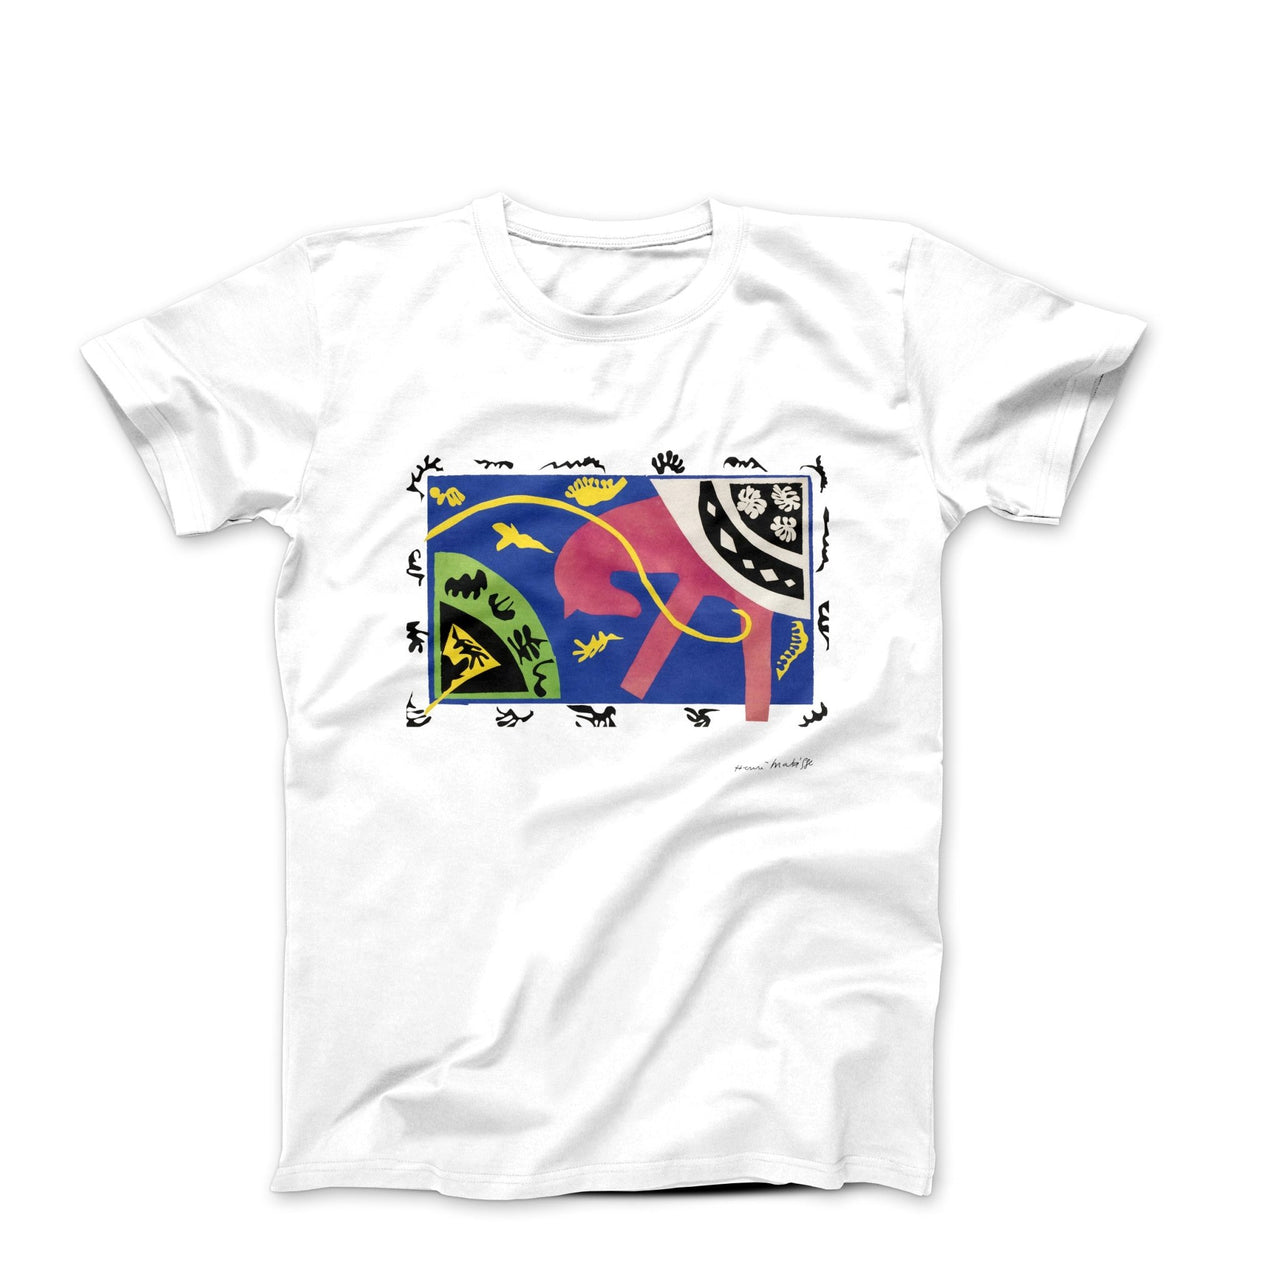 Henri Matisse The Horse, the Squire and the Clown (1947) Artwork T-shirt - Clothing - Harvey Ltd